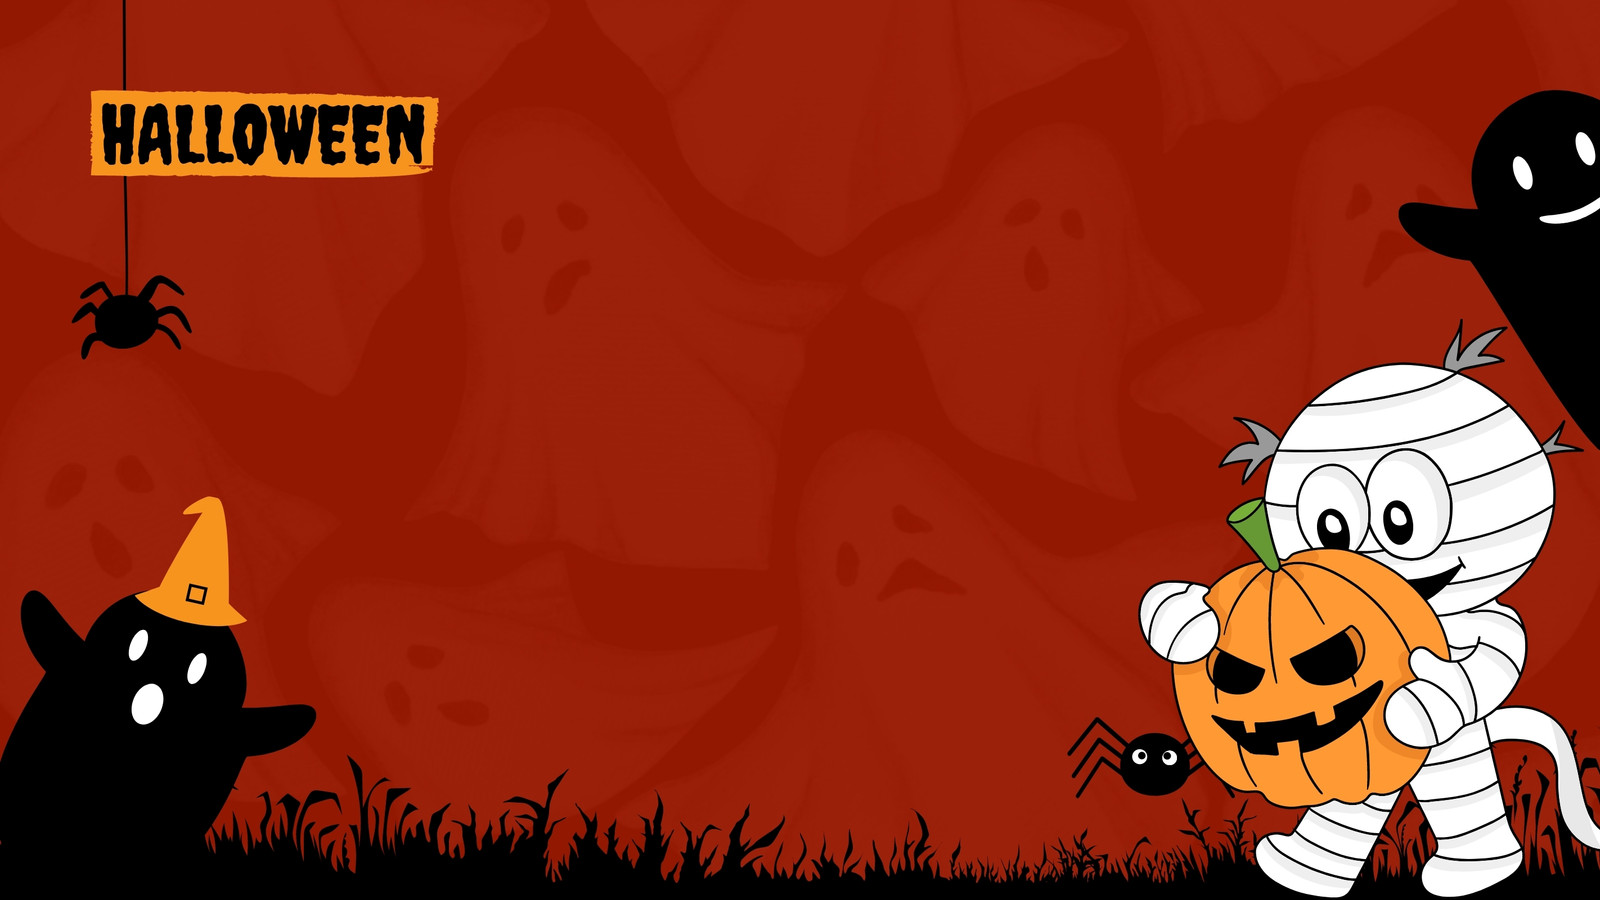 Free Halloween Zoom virtual background templates to edit | Canva